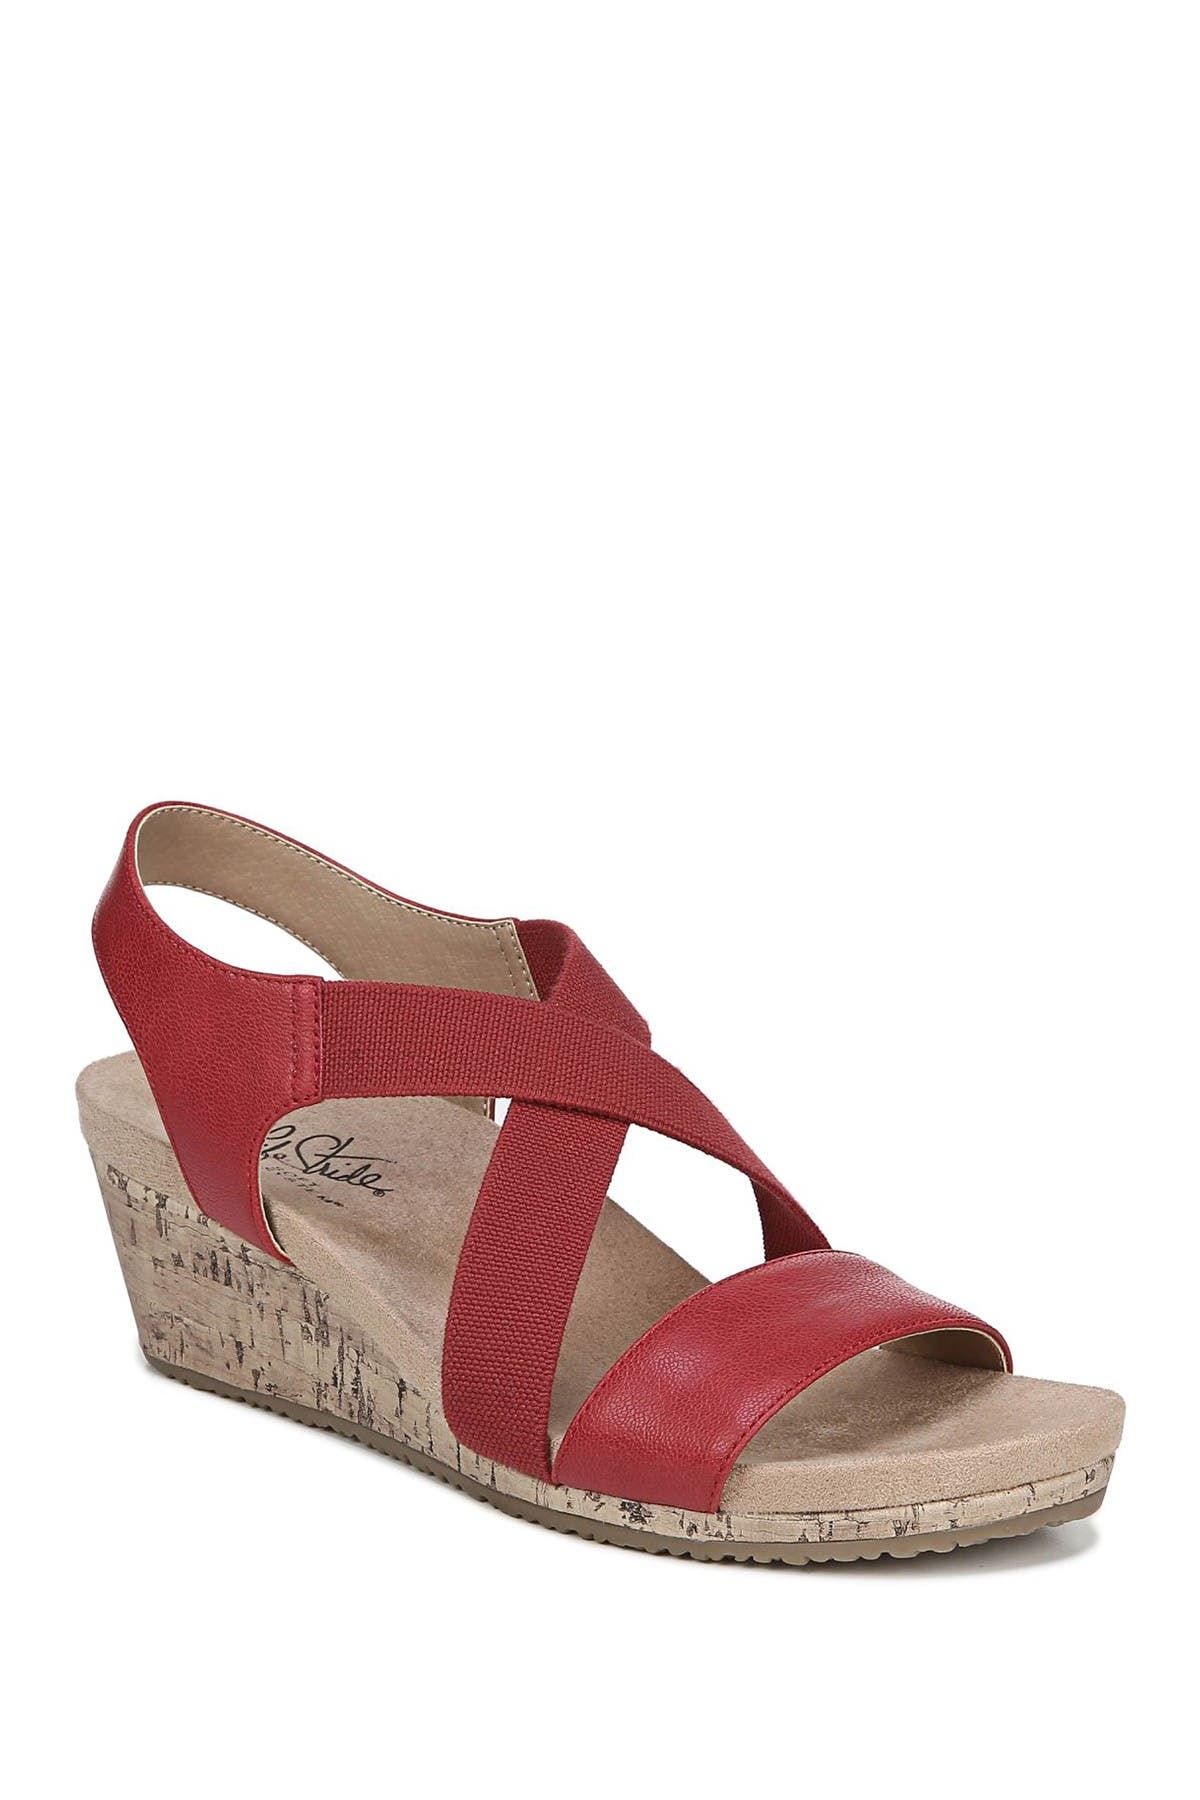 LifeStride | Mexico Wedge Sandal - Wide 